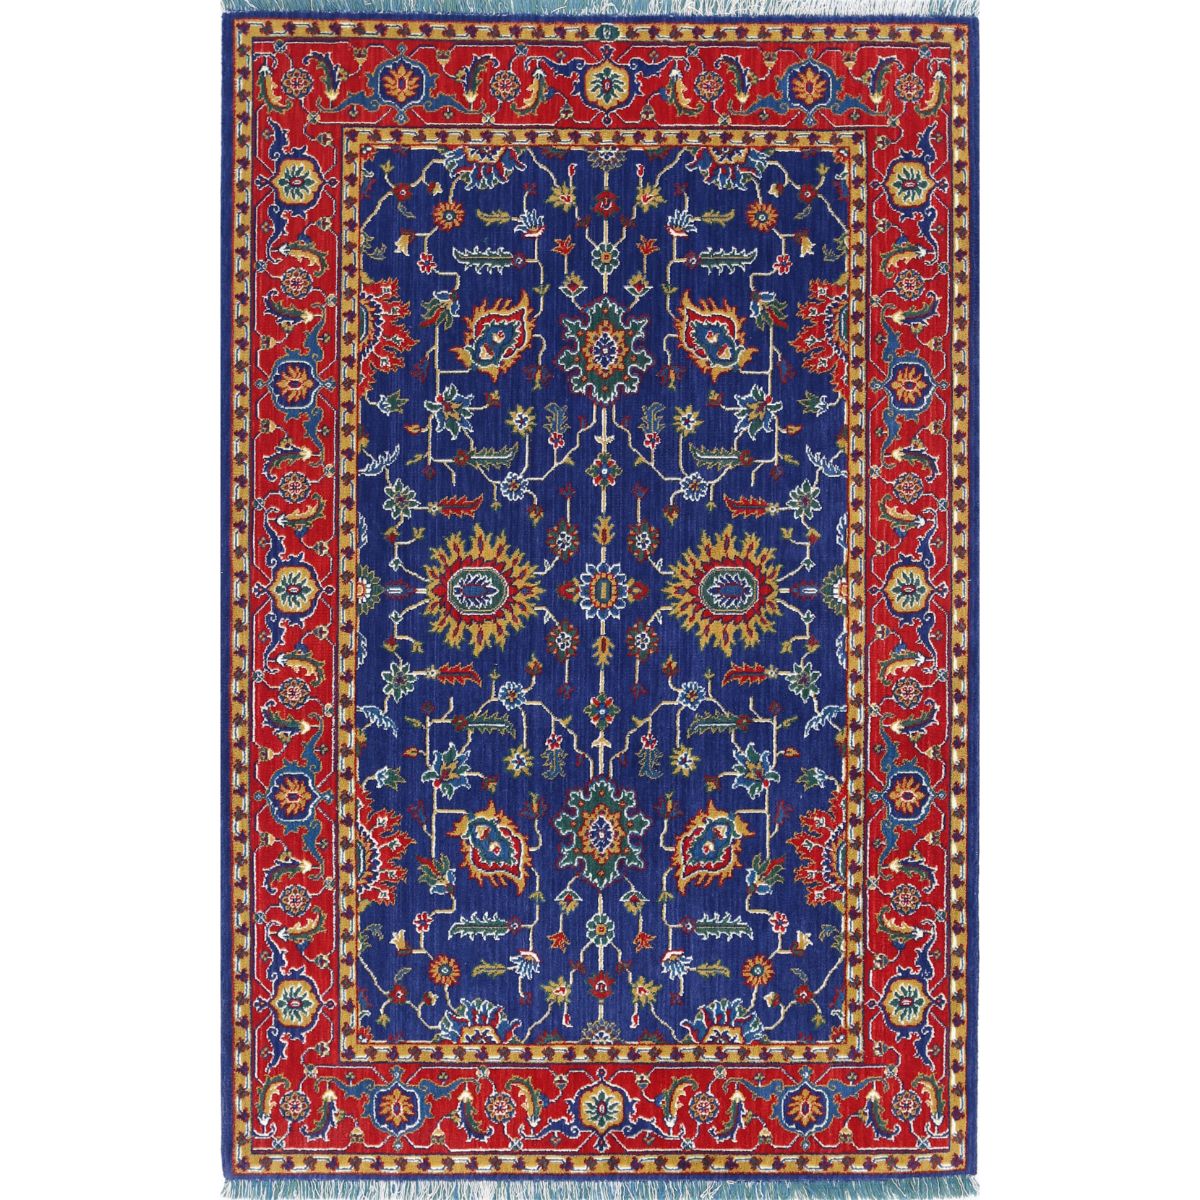 Gulshan Collection Powered Loomed Blue 3'10" X 5'11" Rectangle Gulshan Design Wool Rug